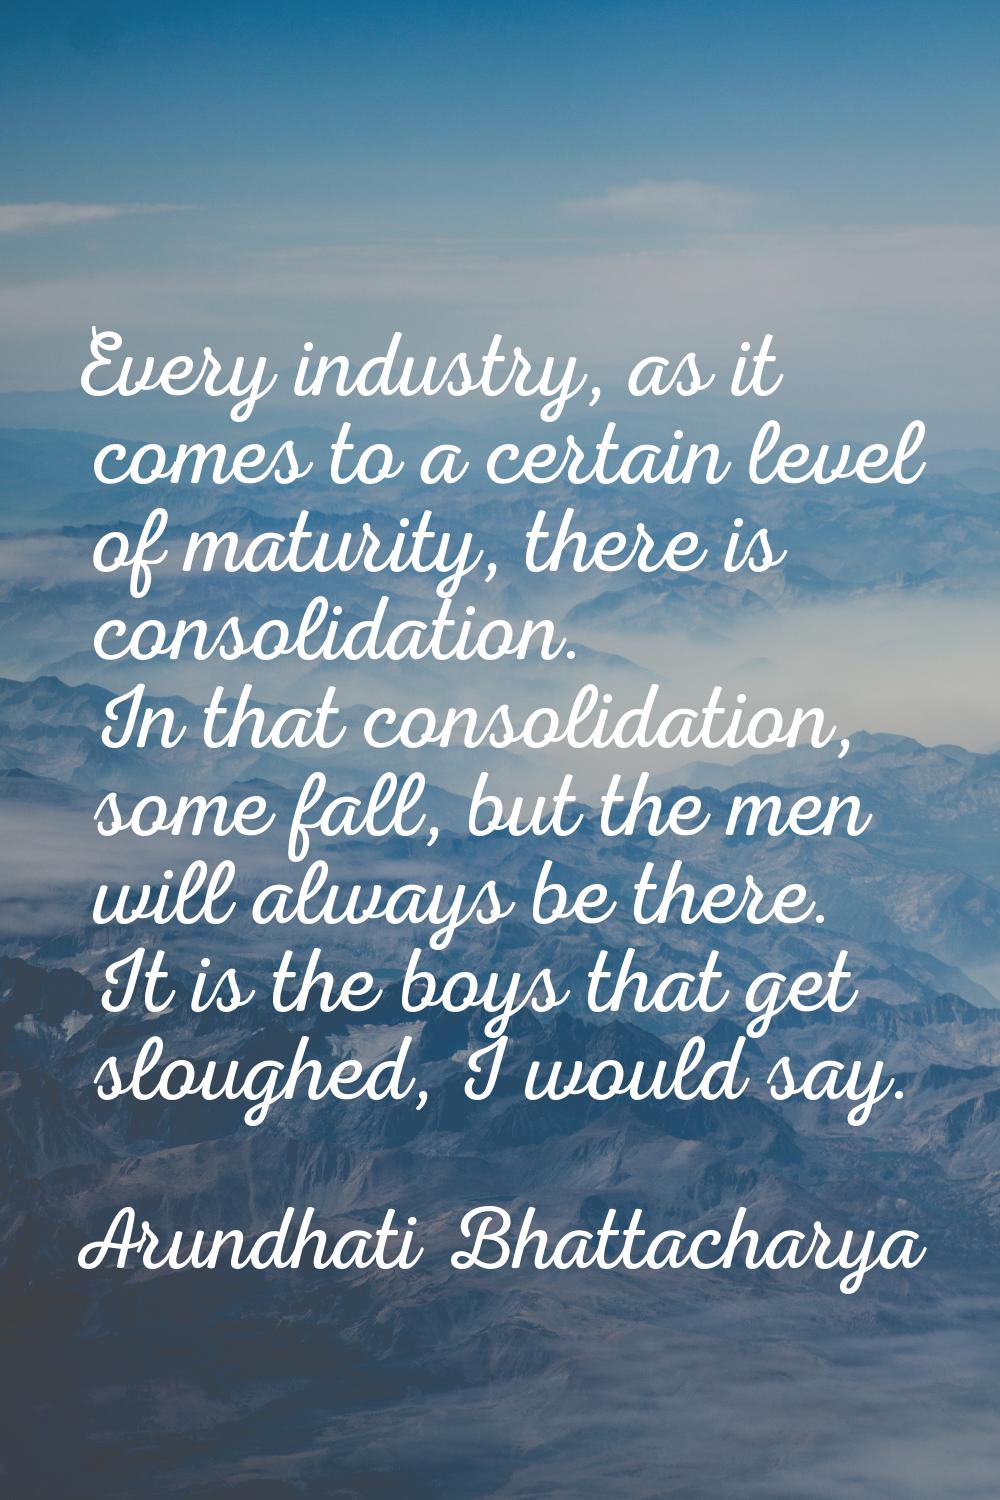 Every industry, as it comes to a certain level of maturity, there is consolidation. In that consoli